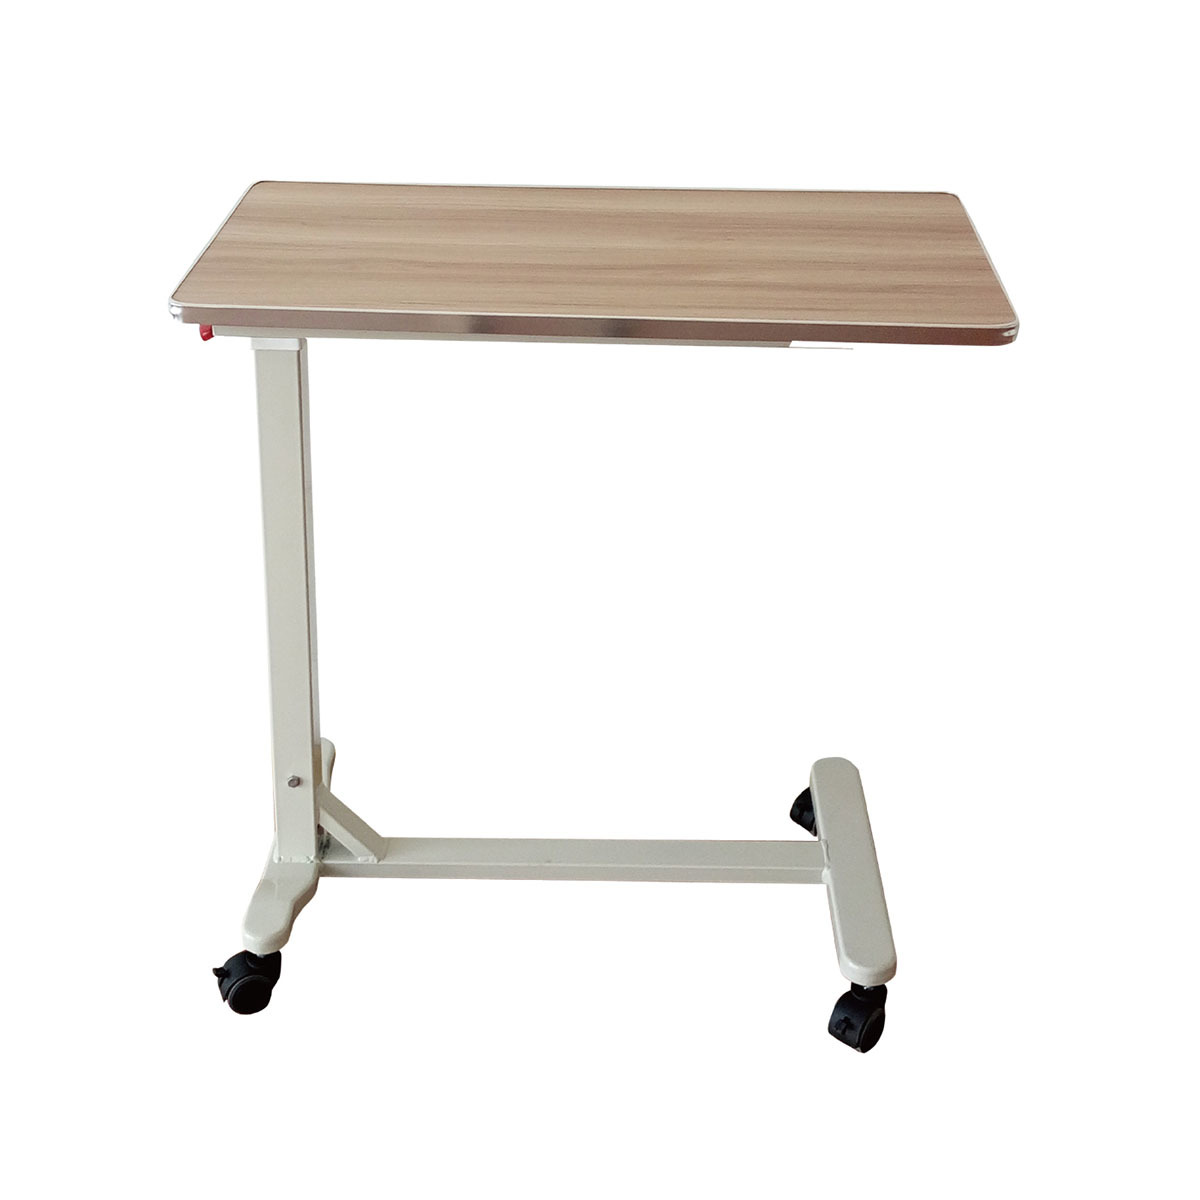 HL-D612C Over bed table